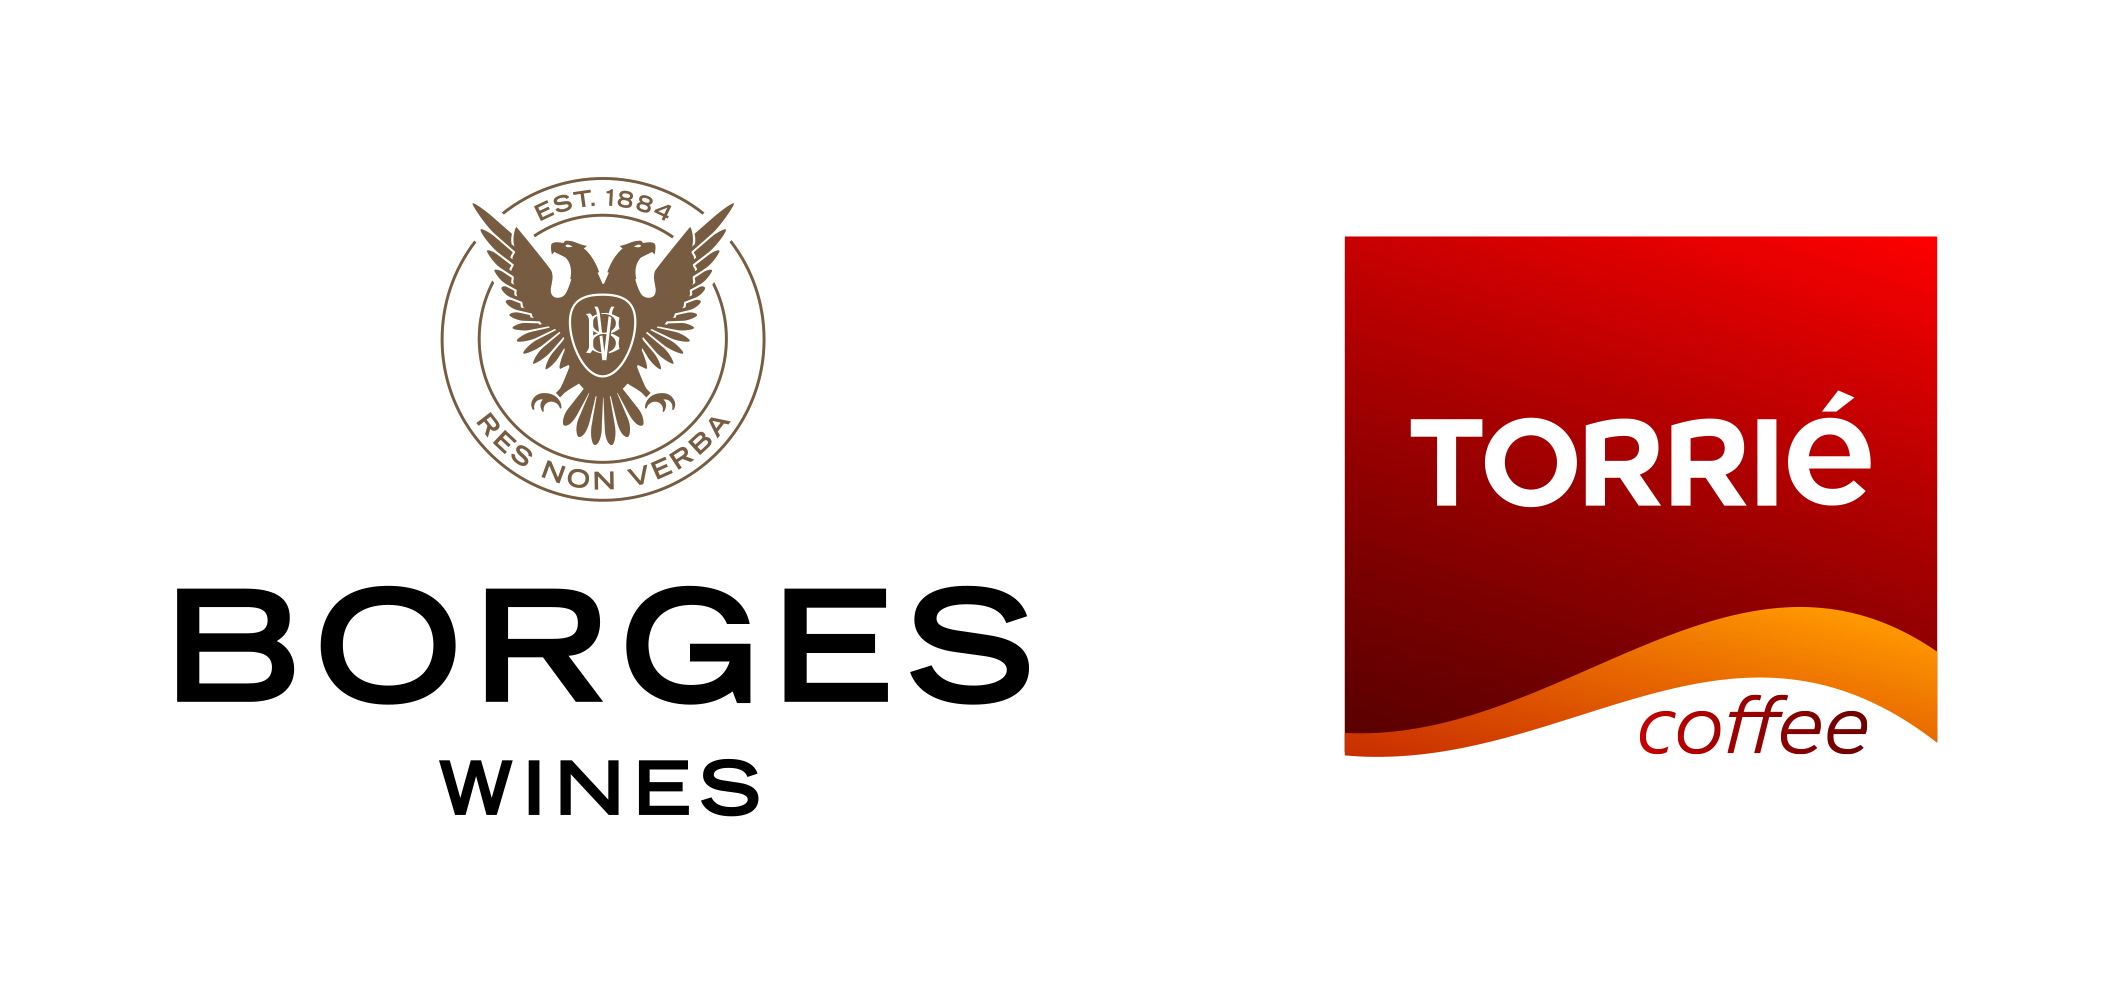 Borges Wines and Torrié Coffee